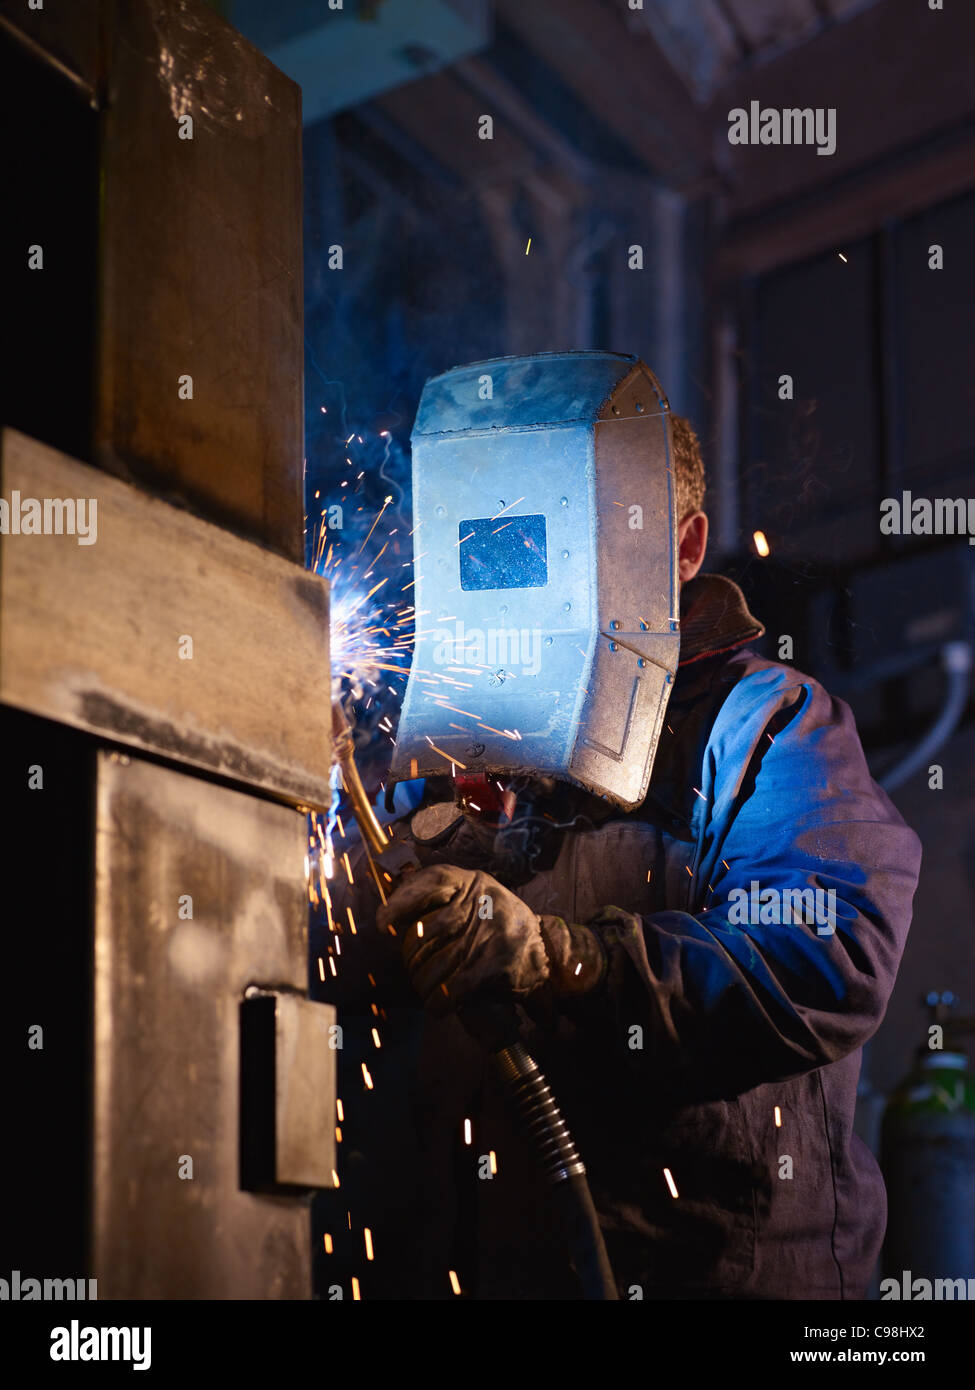 Manual worker in steel factory using welding mask, tools and machinery on metal. Vertical shape, side view, waist up Stock Photo